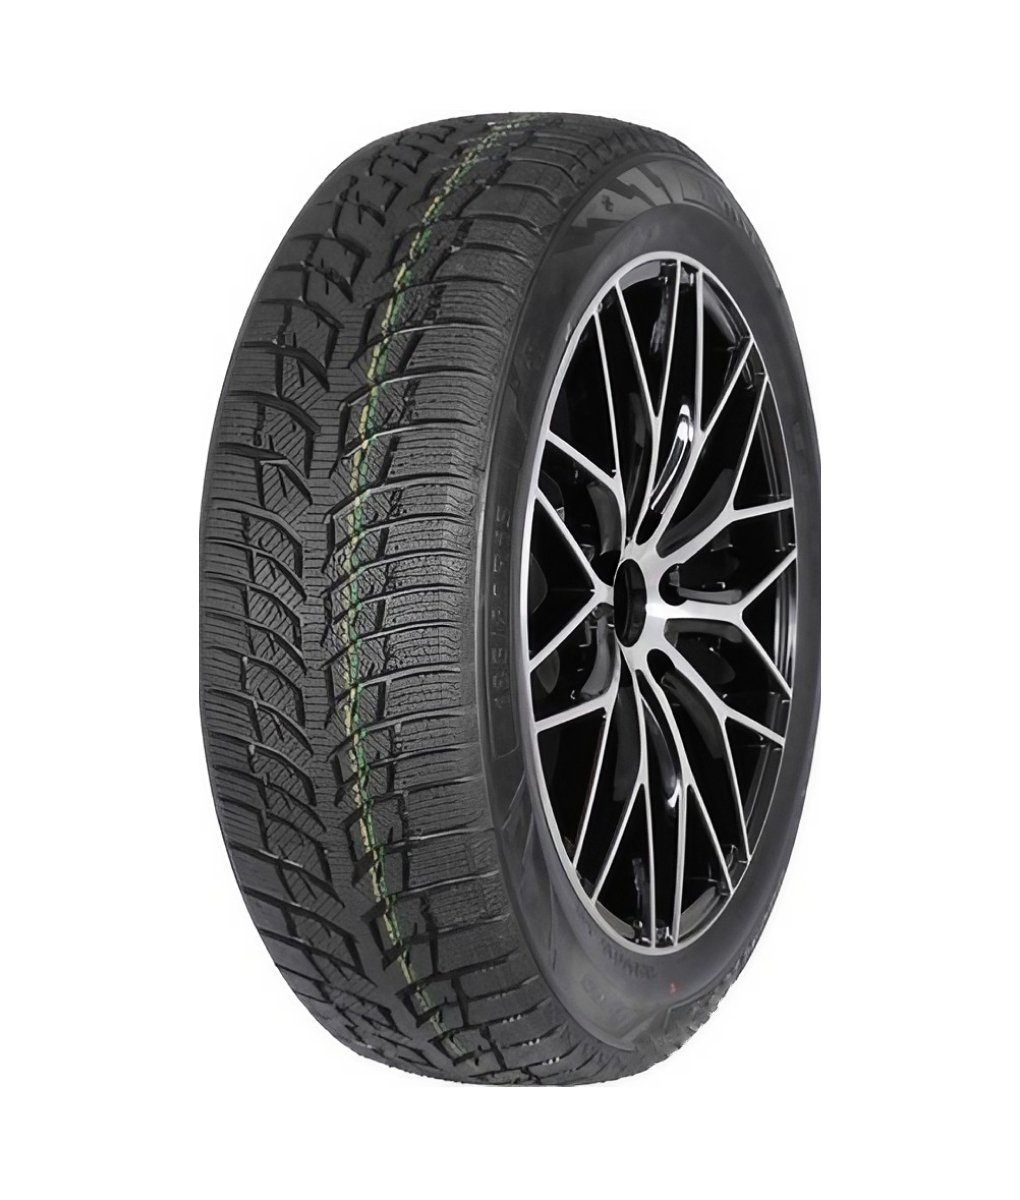 Anvelope Autogreen Snow Chaser 2 Aw08 195/55R15 85T Iarna